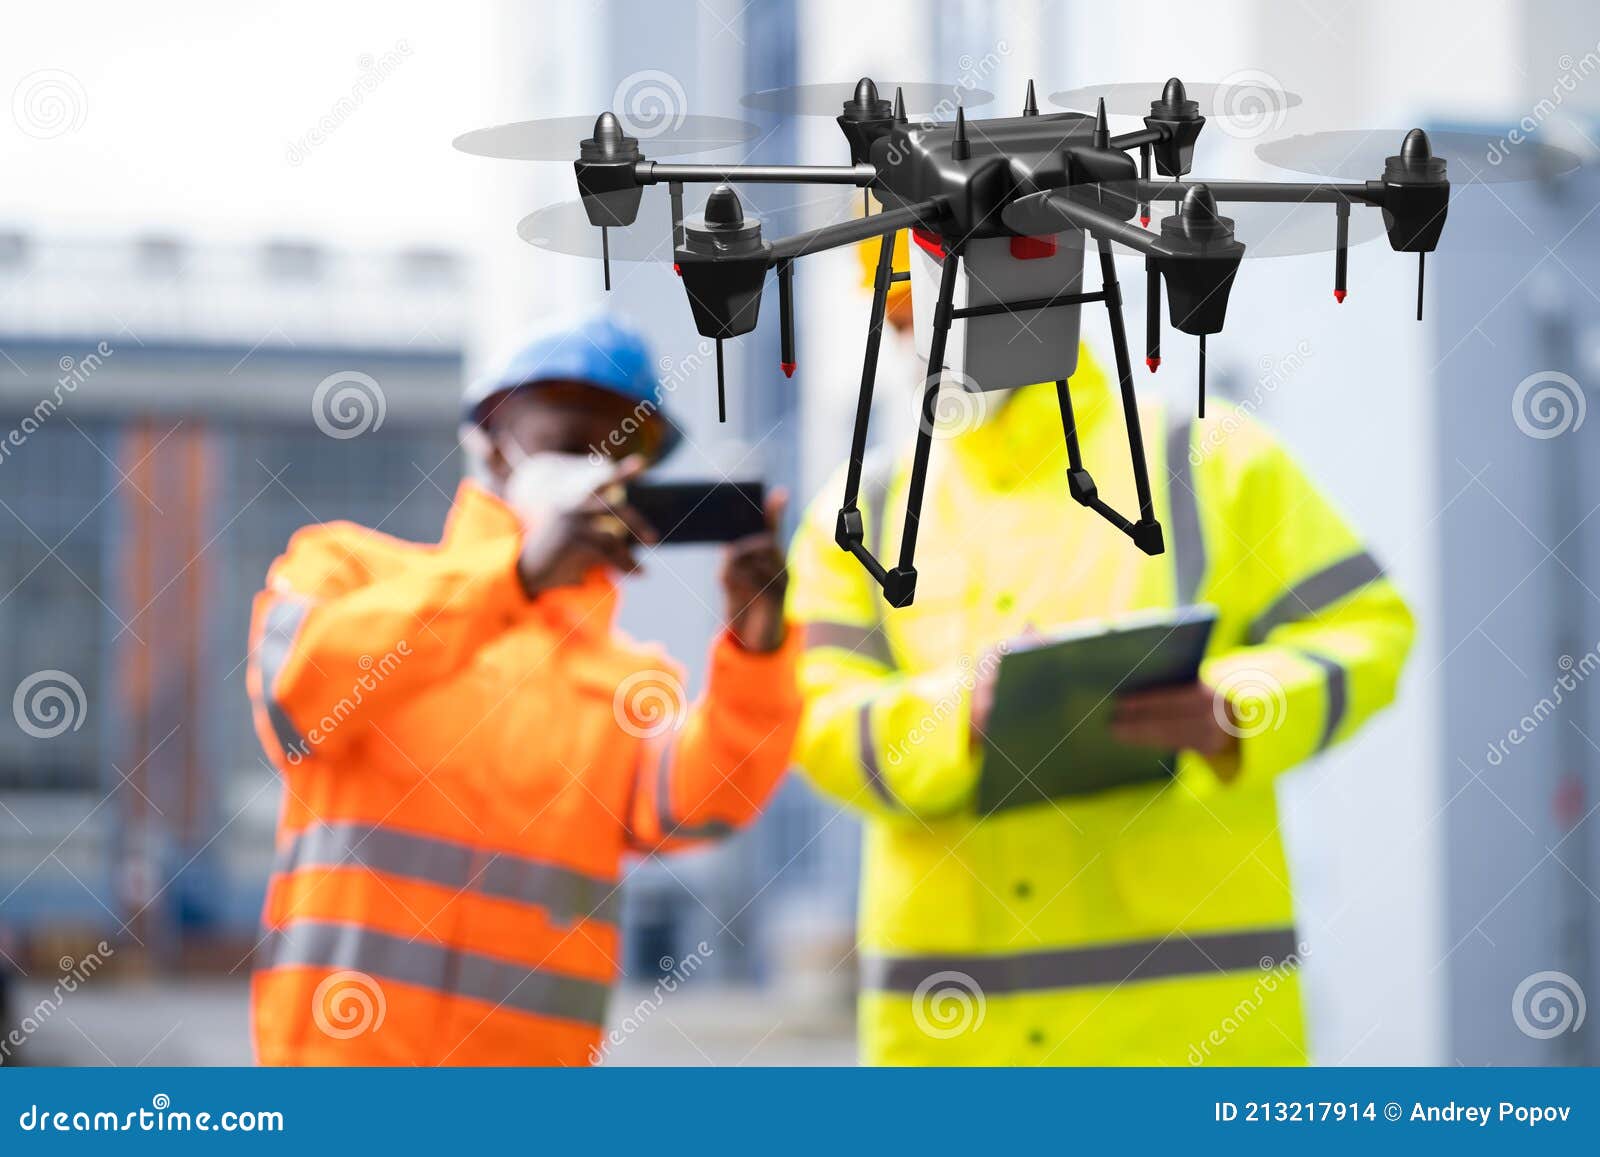 industrial unmanned drone survey and discovery